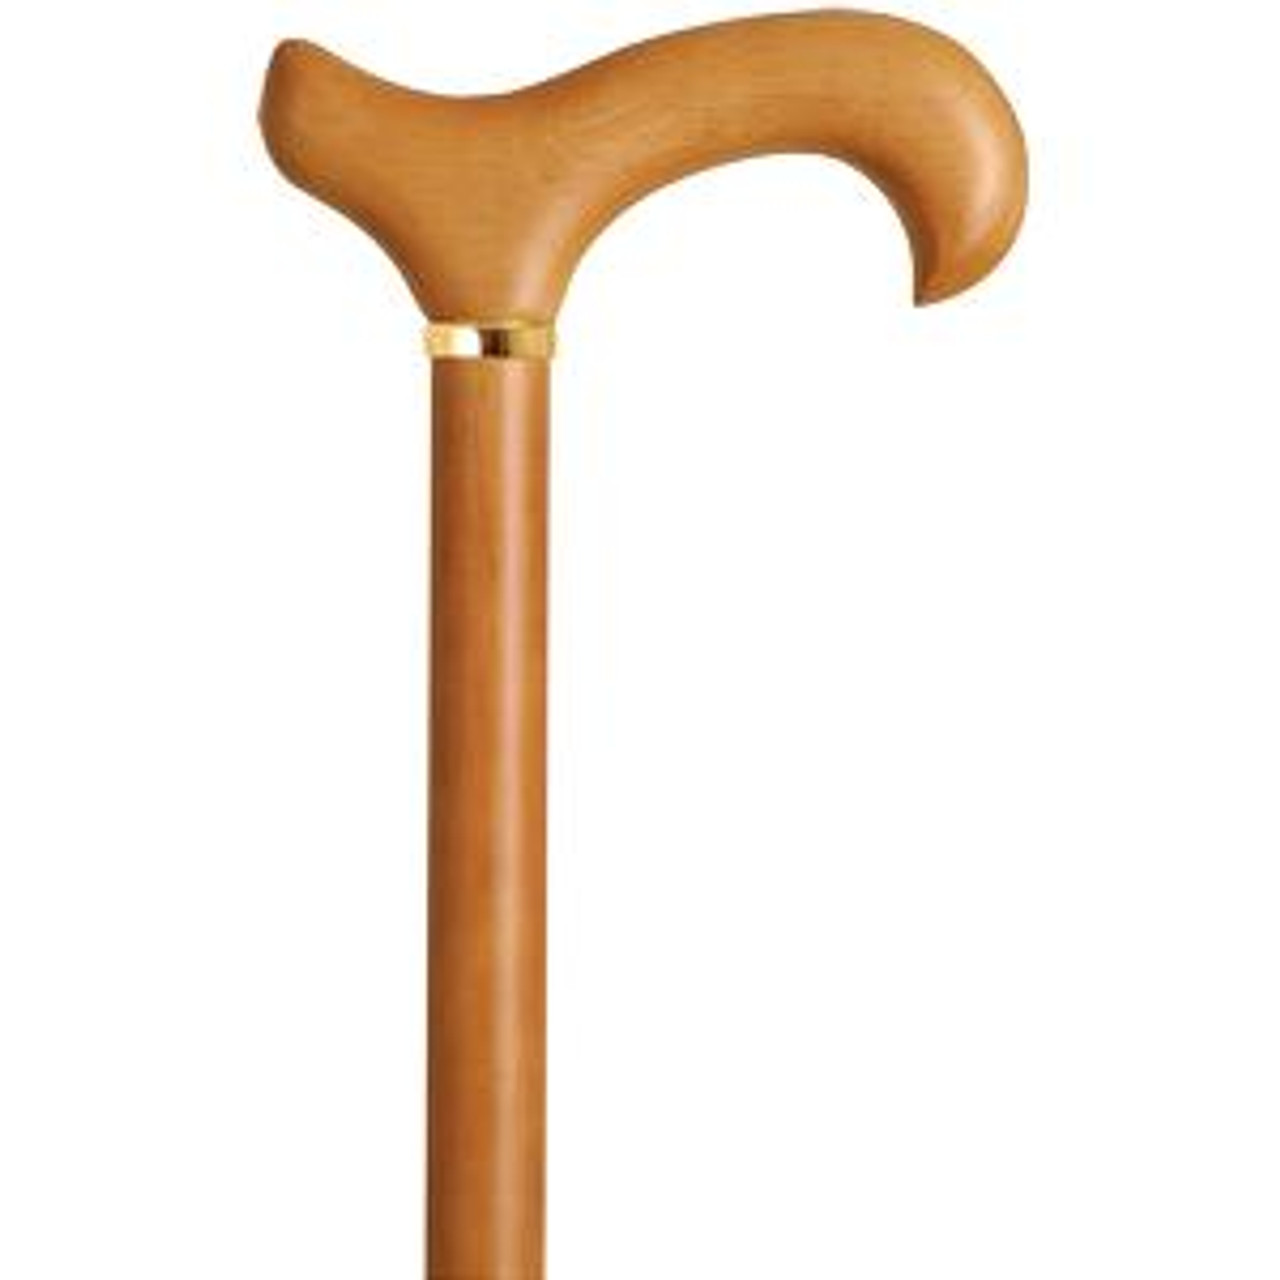 Alex Orthopedic Men's Derby Handle Cane in Natural Stain